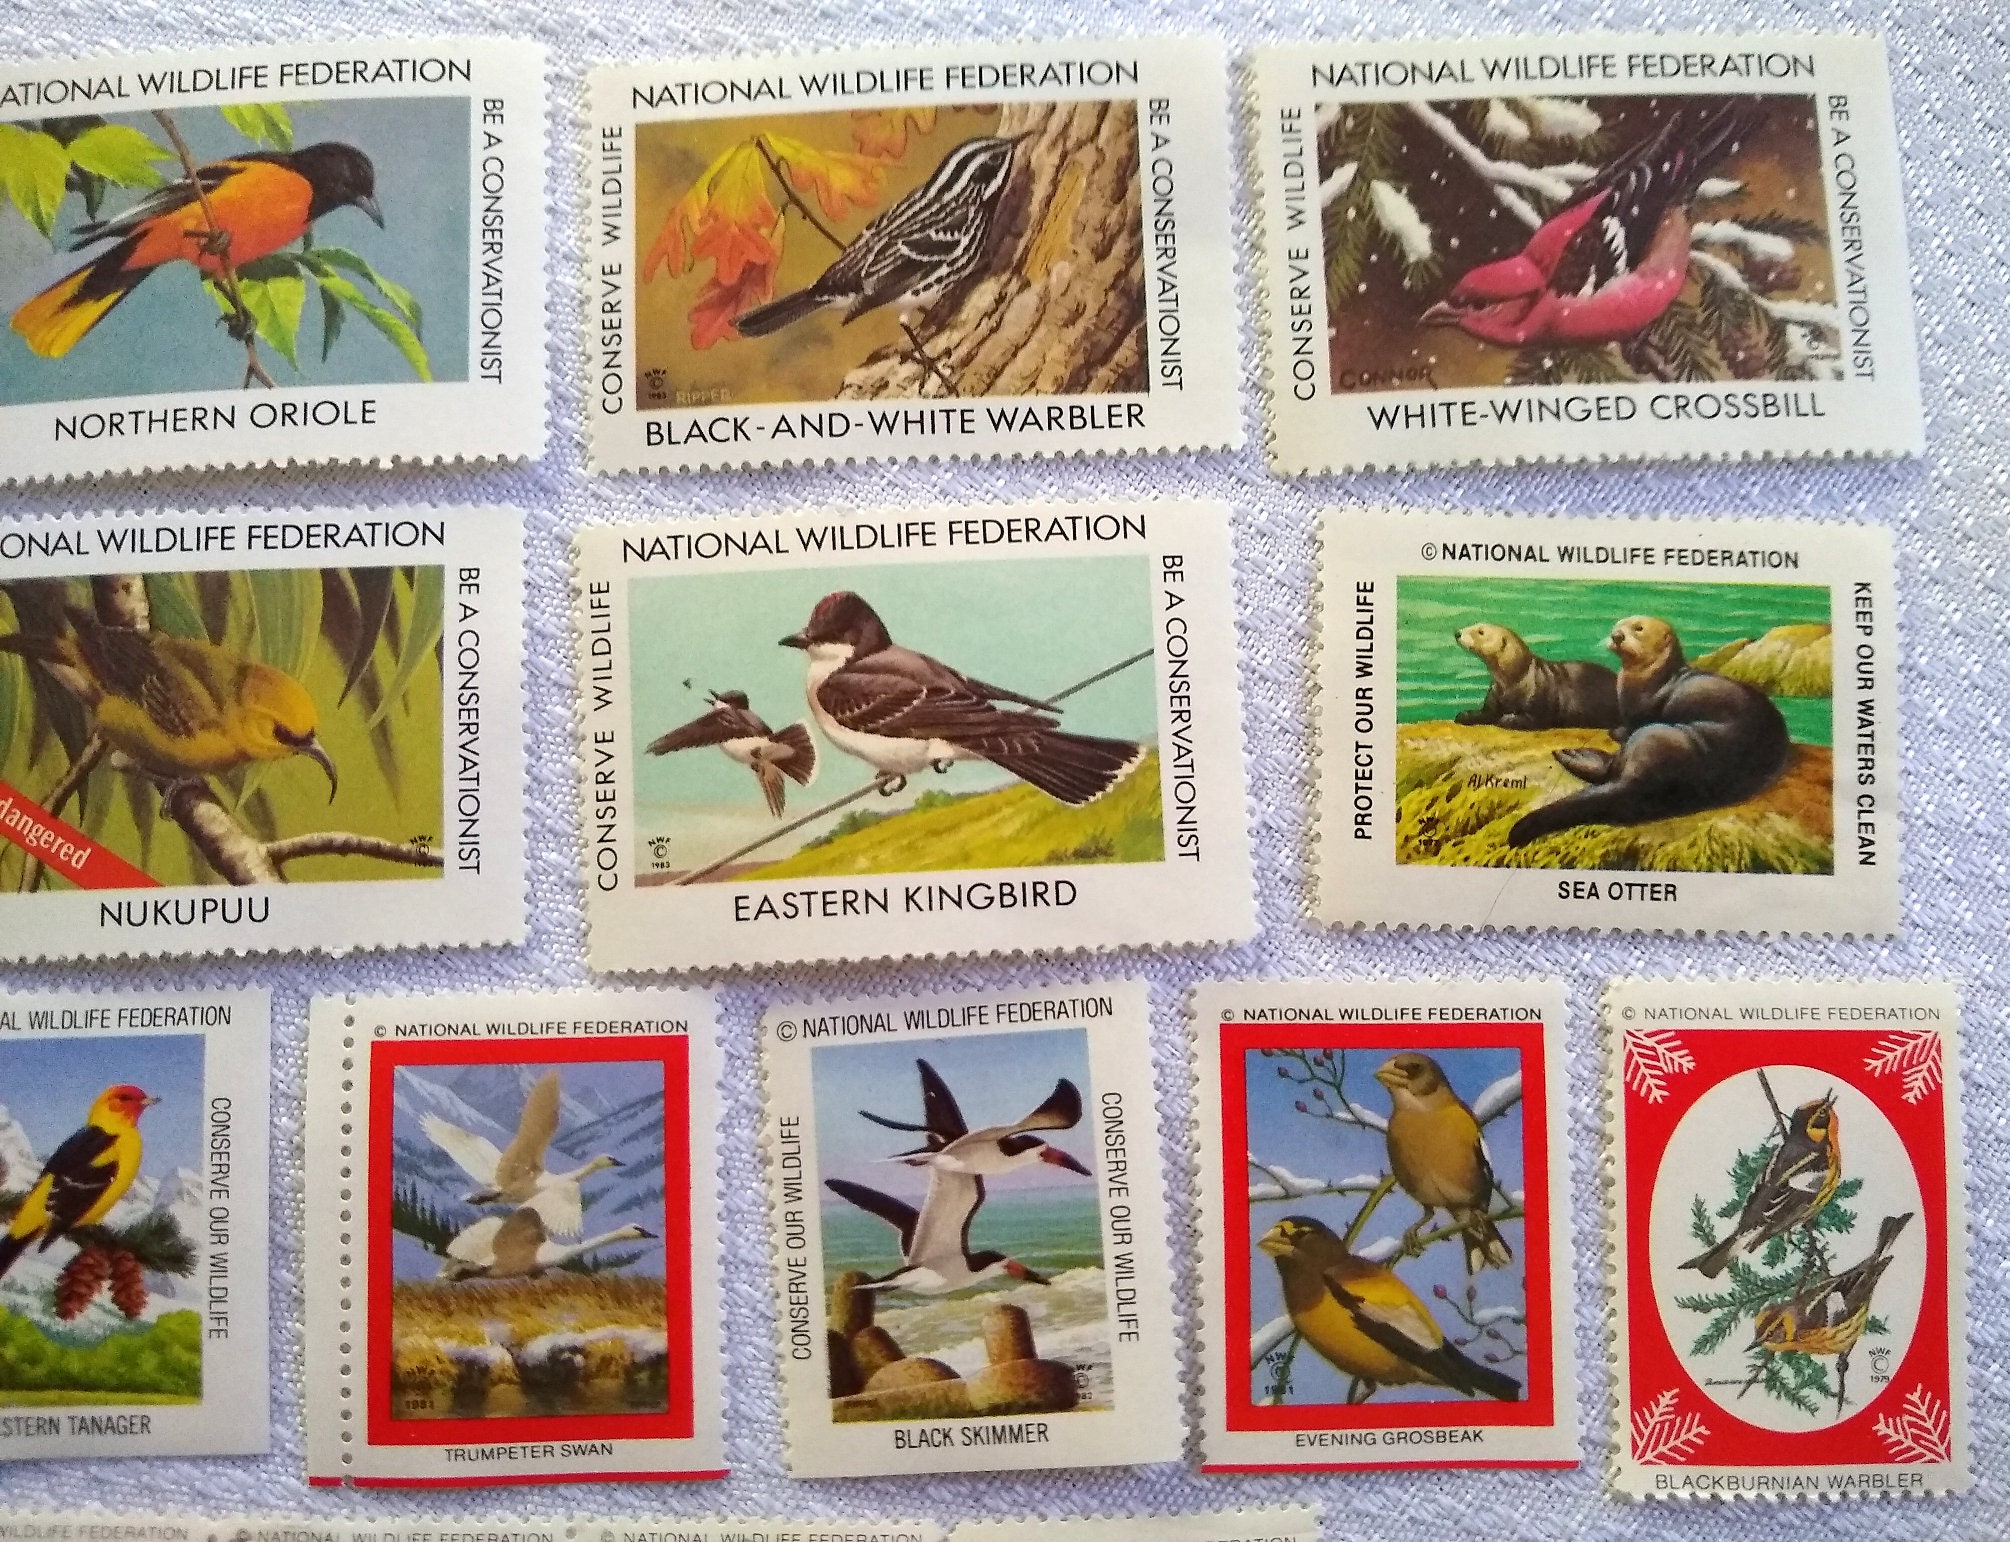 WILDLIFE POSTAL STAMP BOOK - collectibles - by owner - sale